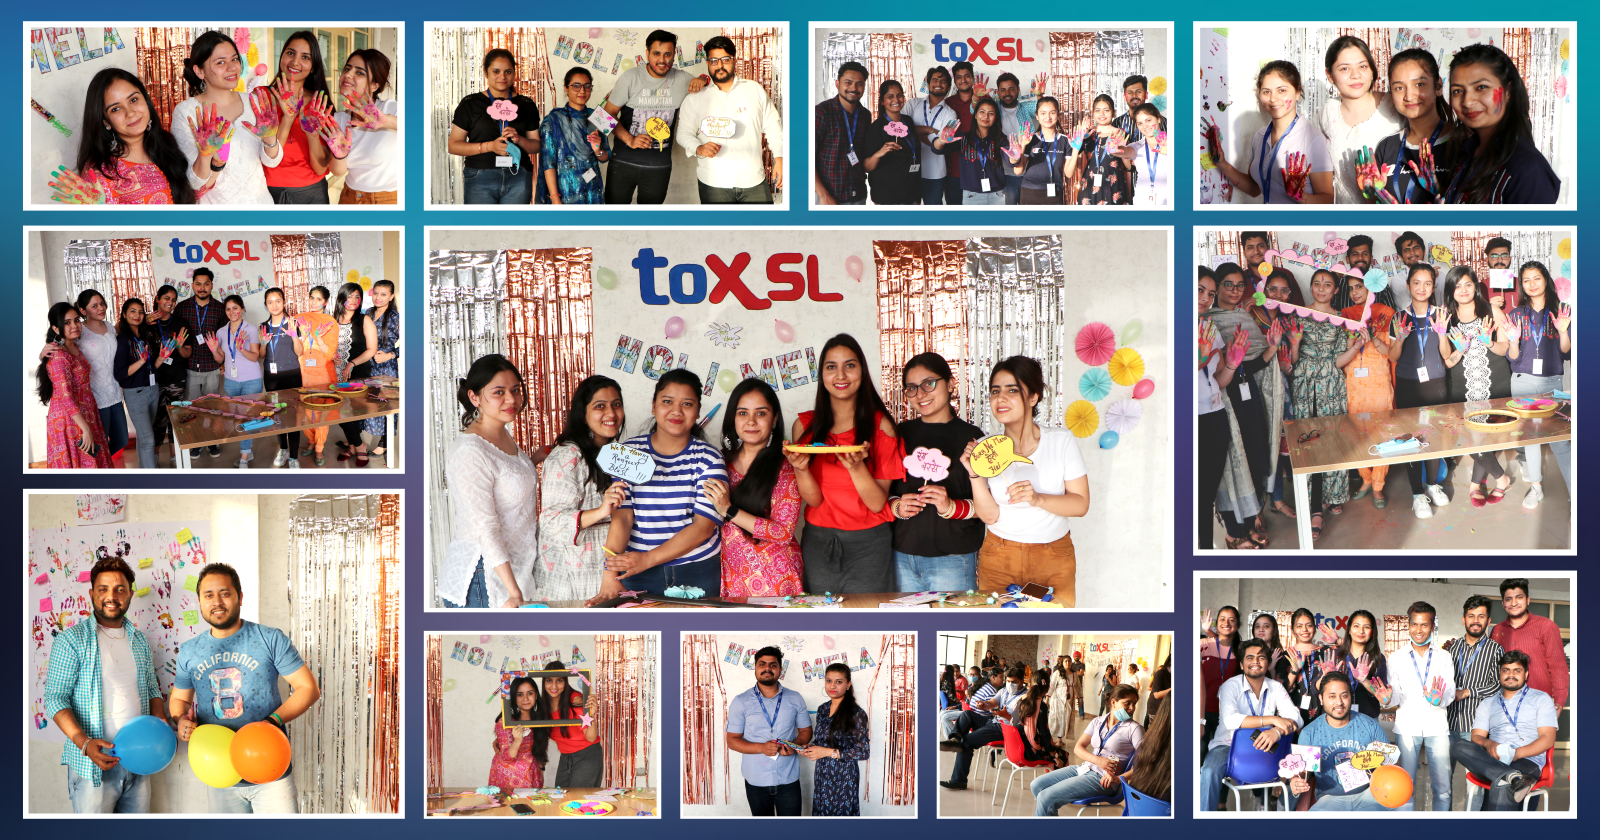 ToXSL Celebrated the Vibrant Festival of Colors with Joy!